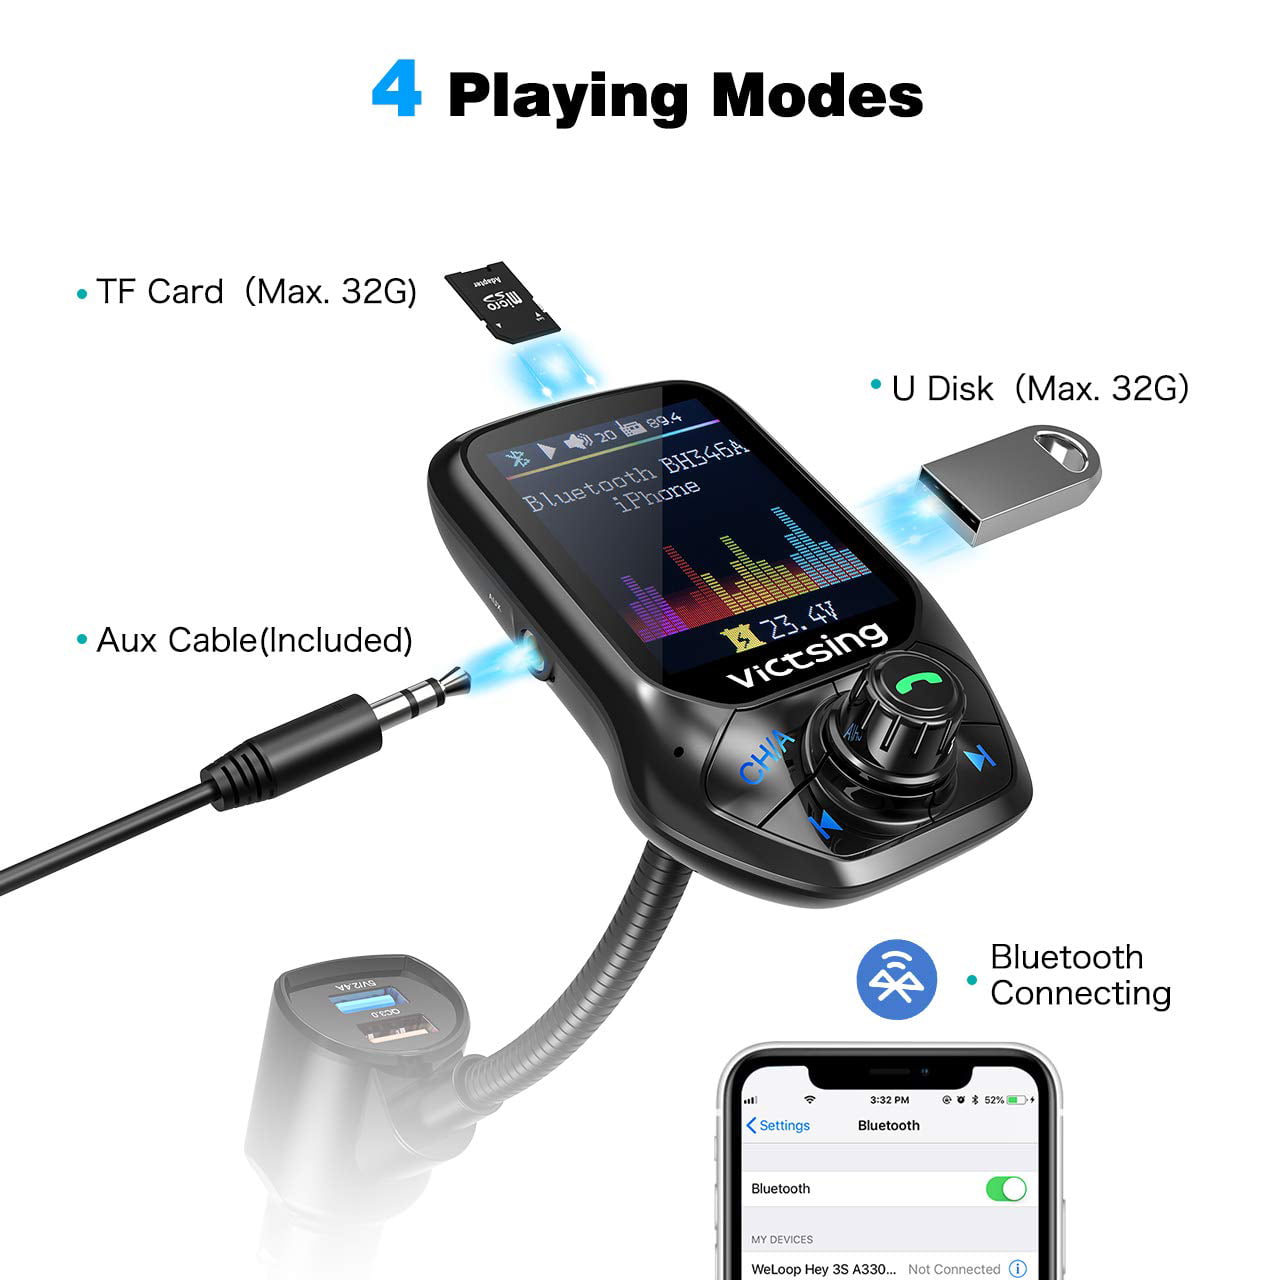 Auto Scan Function Hands-Free Calls 3 USB Ports 1.8 Color Screen Wireless Radio Transmitter Adapter with EQ Mode Upgraded Version AUX Input 4 Music Playing Bluetooth FM Transmitter for Car